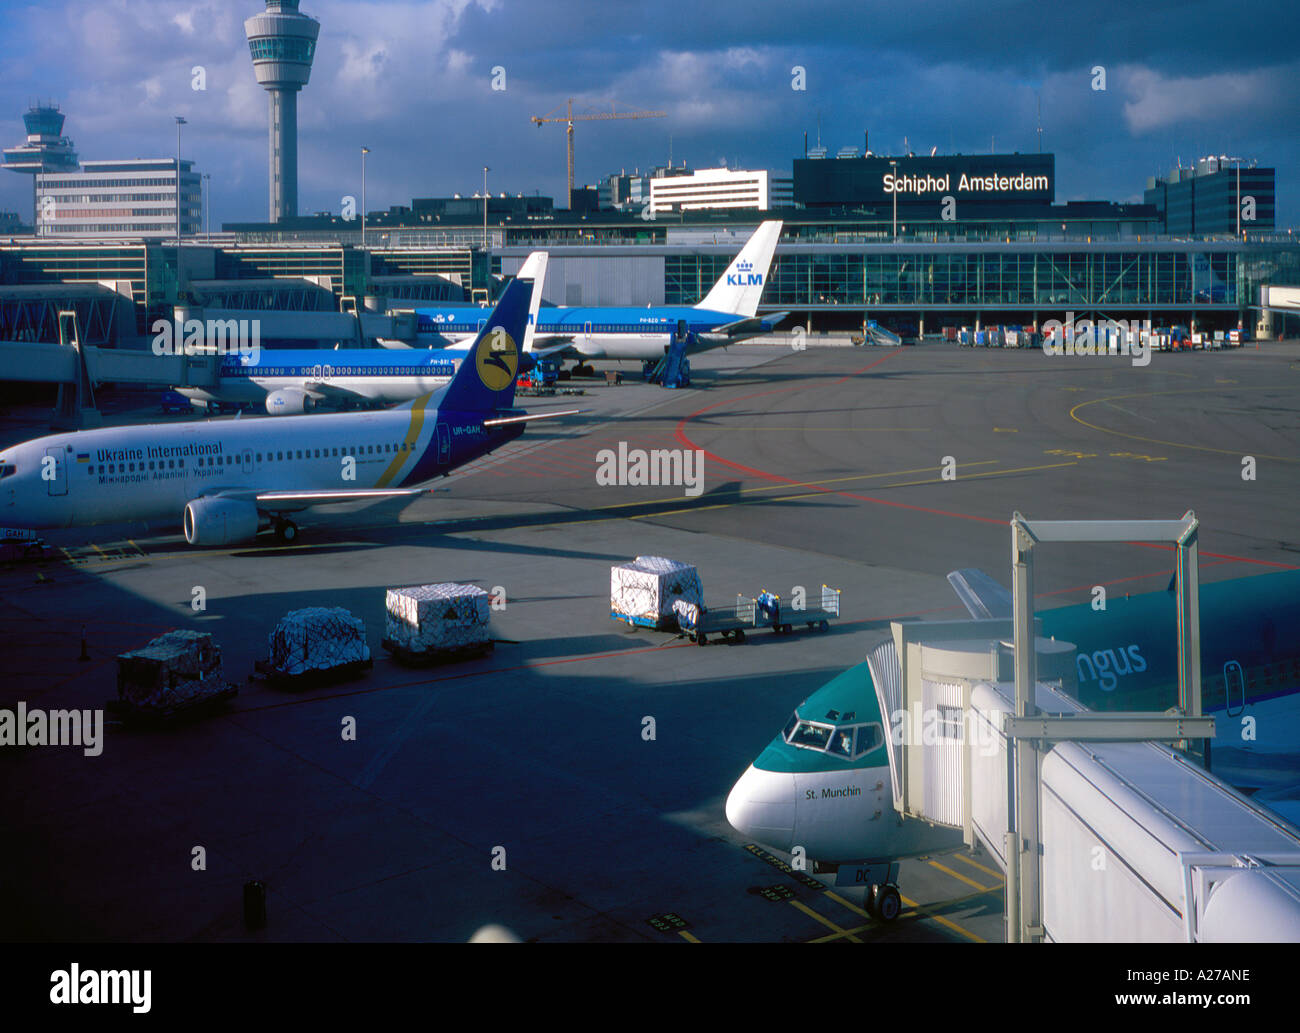 Airport Schiphol Amsterdam, Netherlands, Europe. Photo by Willy Matheisl Stock Photo